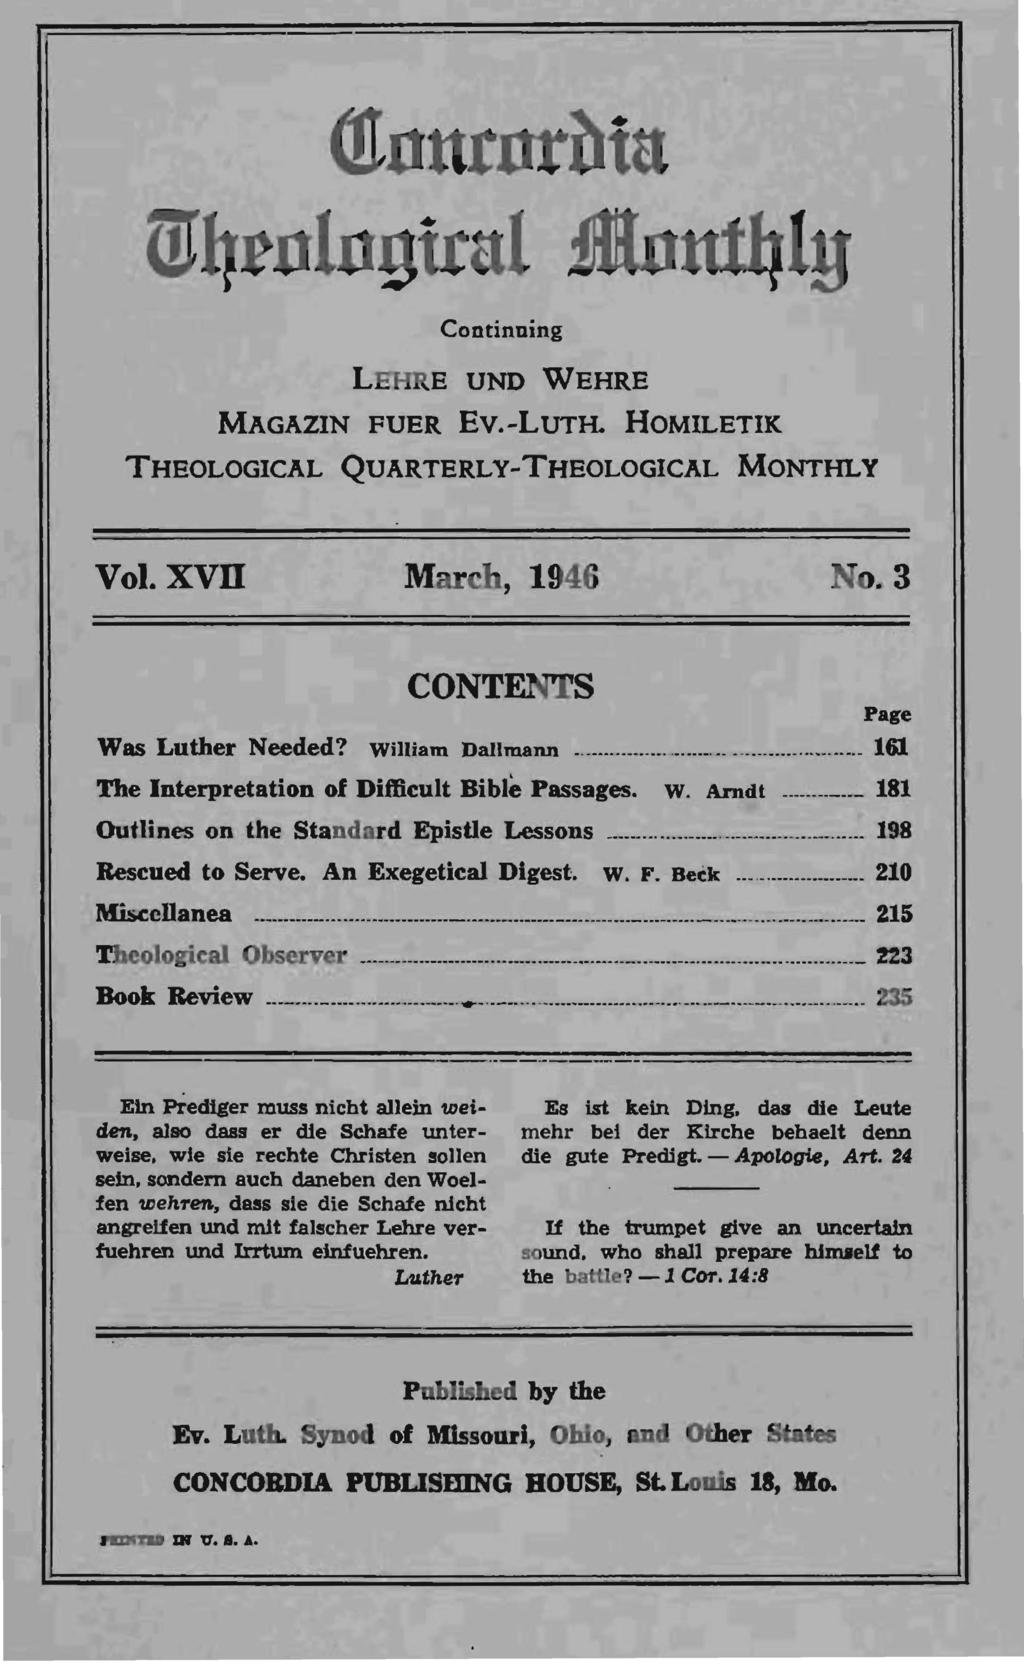 (ttnurnrbta (Uqrnlngical.itntttl}ly Continning L E'HRE UNO WEHRE MAGAZIN FUER EV.-LUTH. HOMILETIK THEOLOGICAL QUARTERLY-THEOLOGICAL MONTHLY Vol. xvn March, 1946 No.3 CONTENTS Page Was Luther Needed?